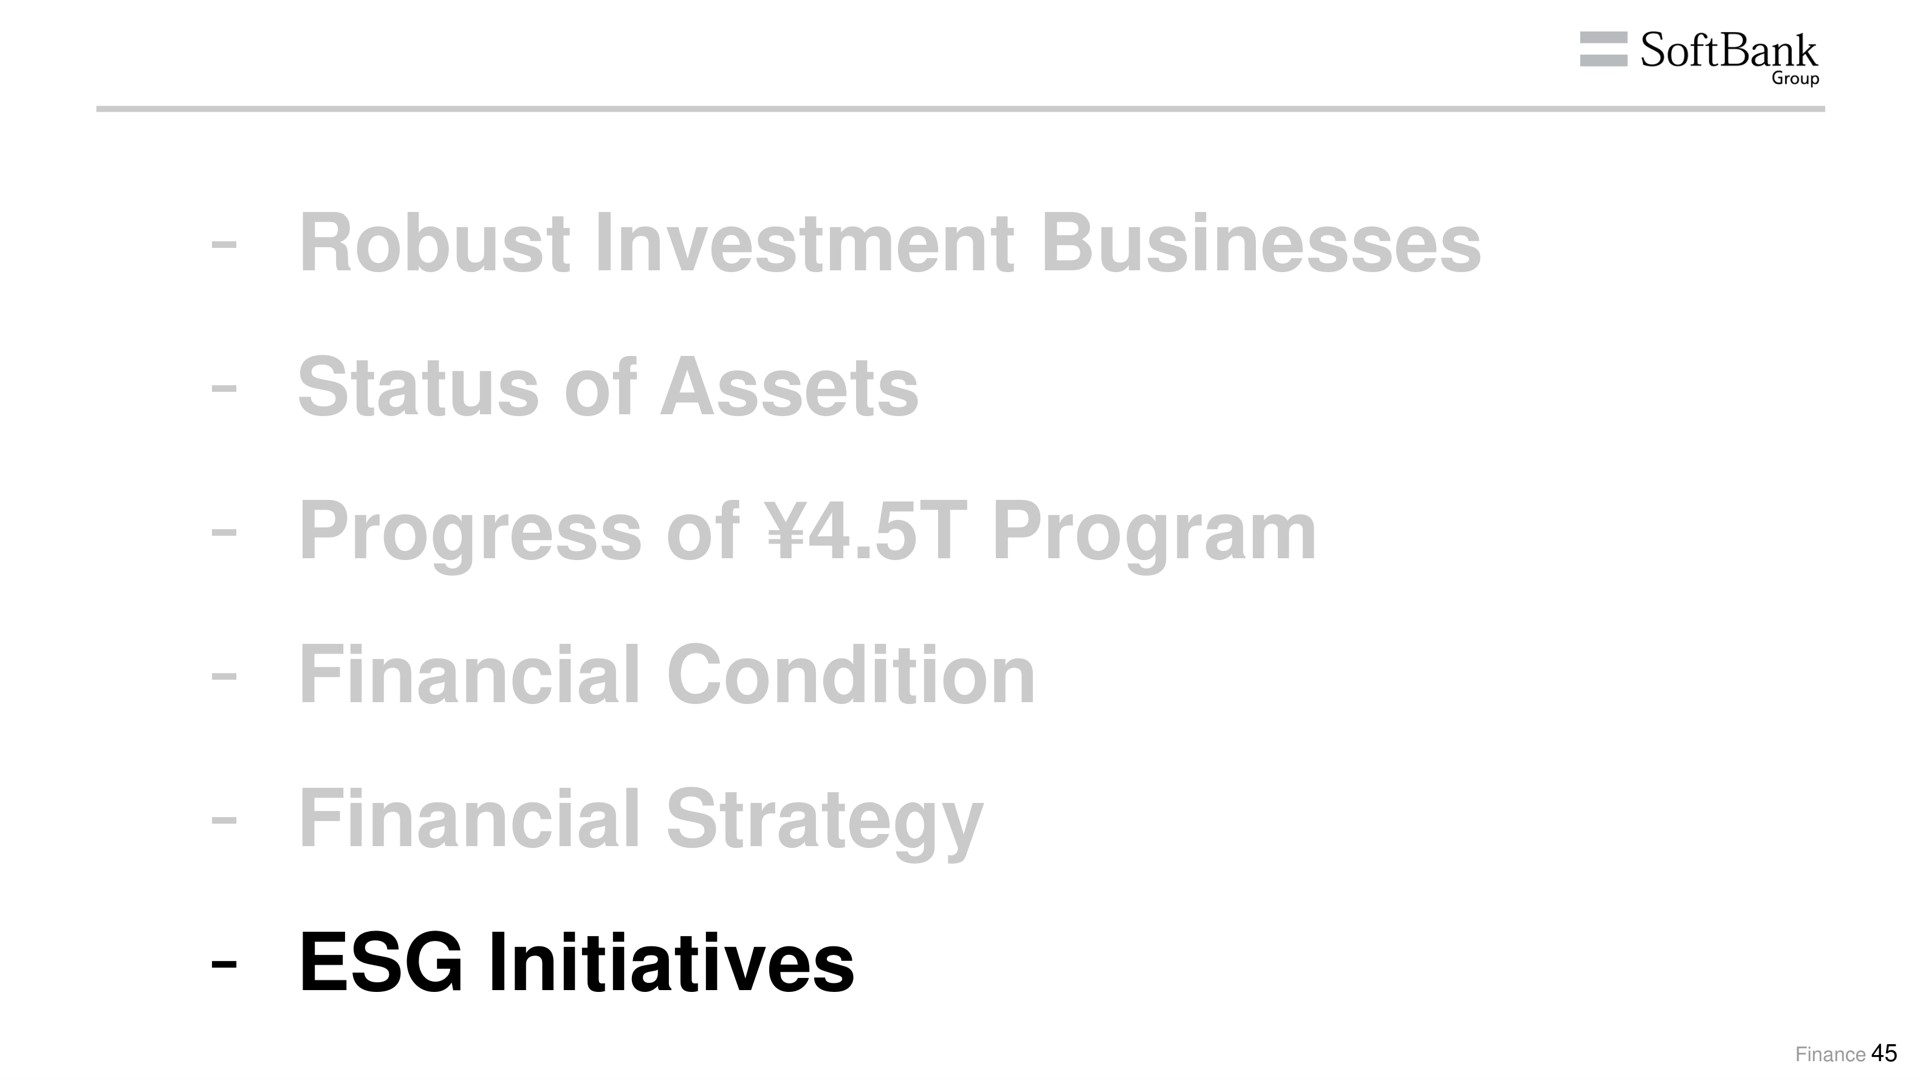 robust investment businesses status of assets progress of program financial condition financial strategy initiatives | SoftBank